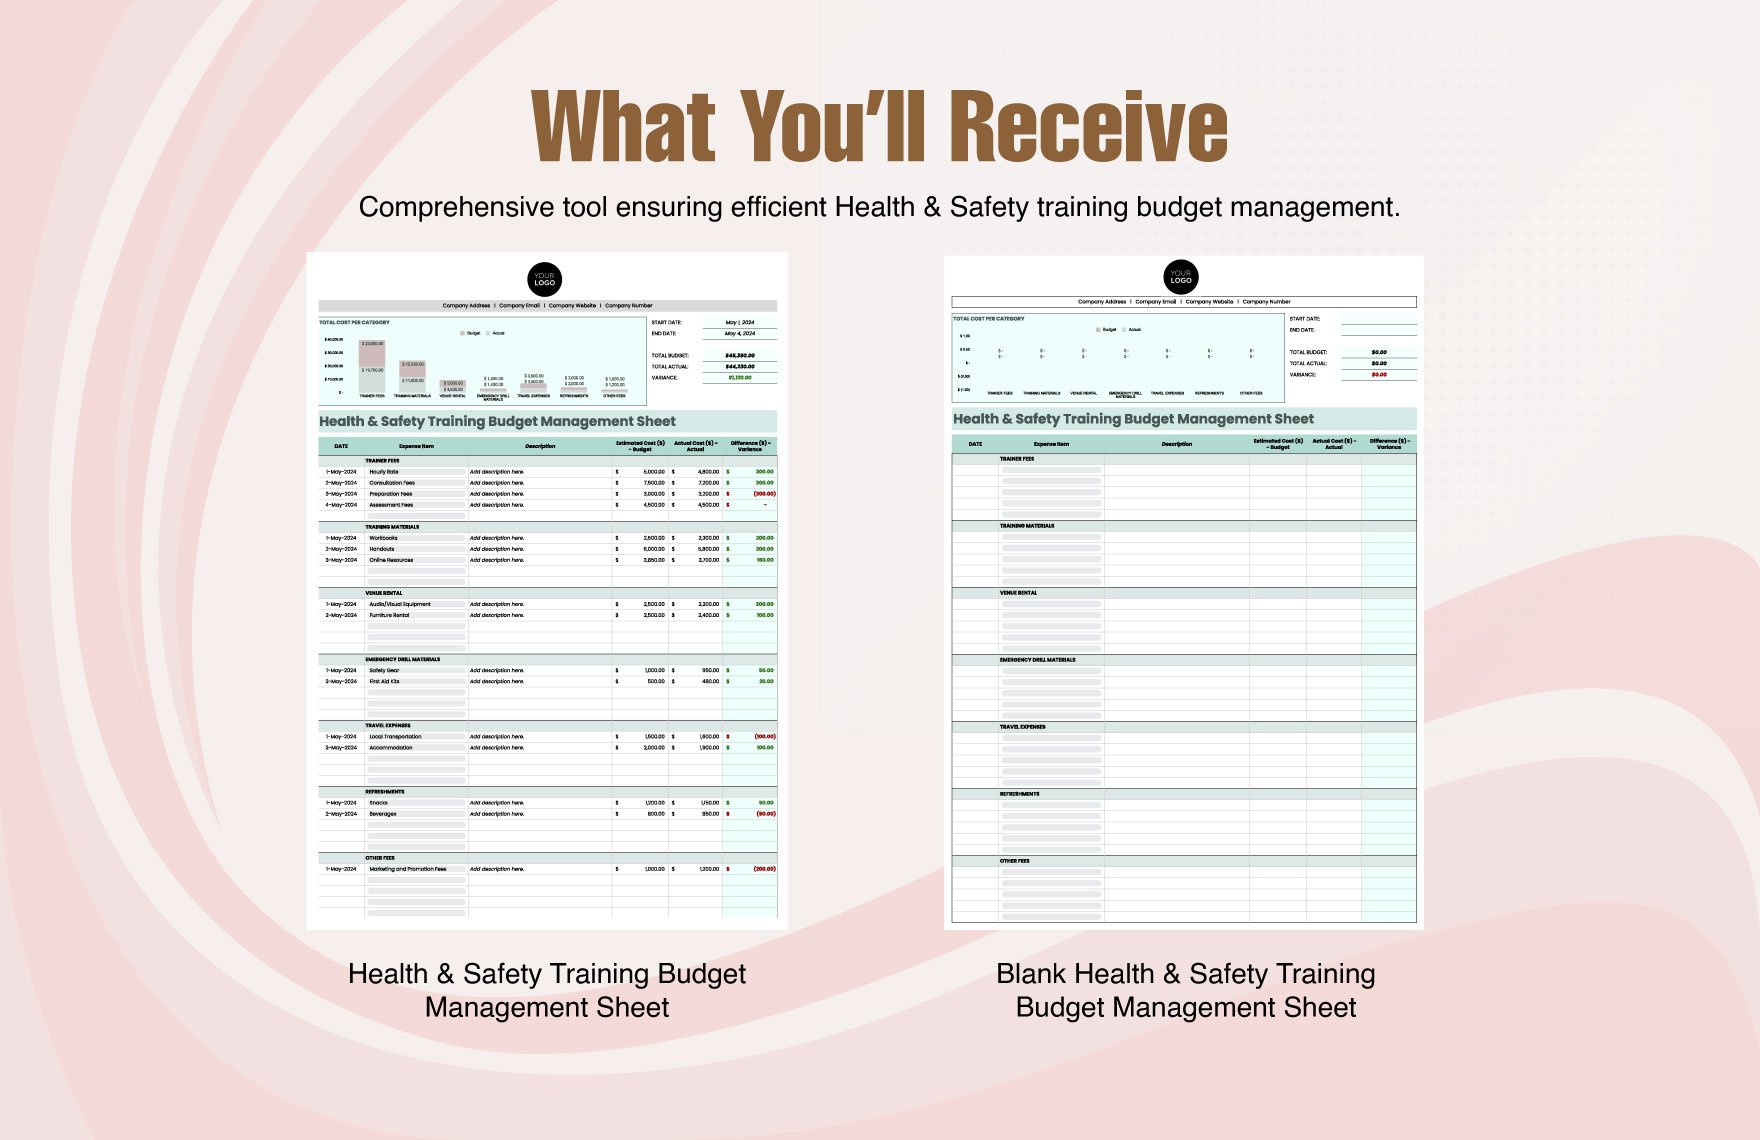 Health & Safety Training Budget Management Sheet Template